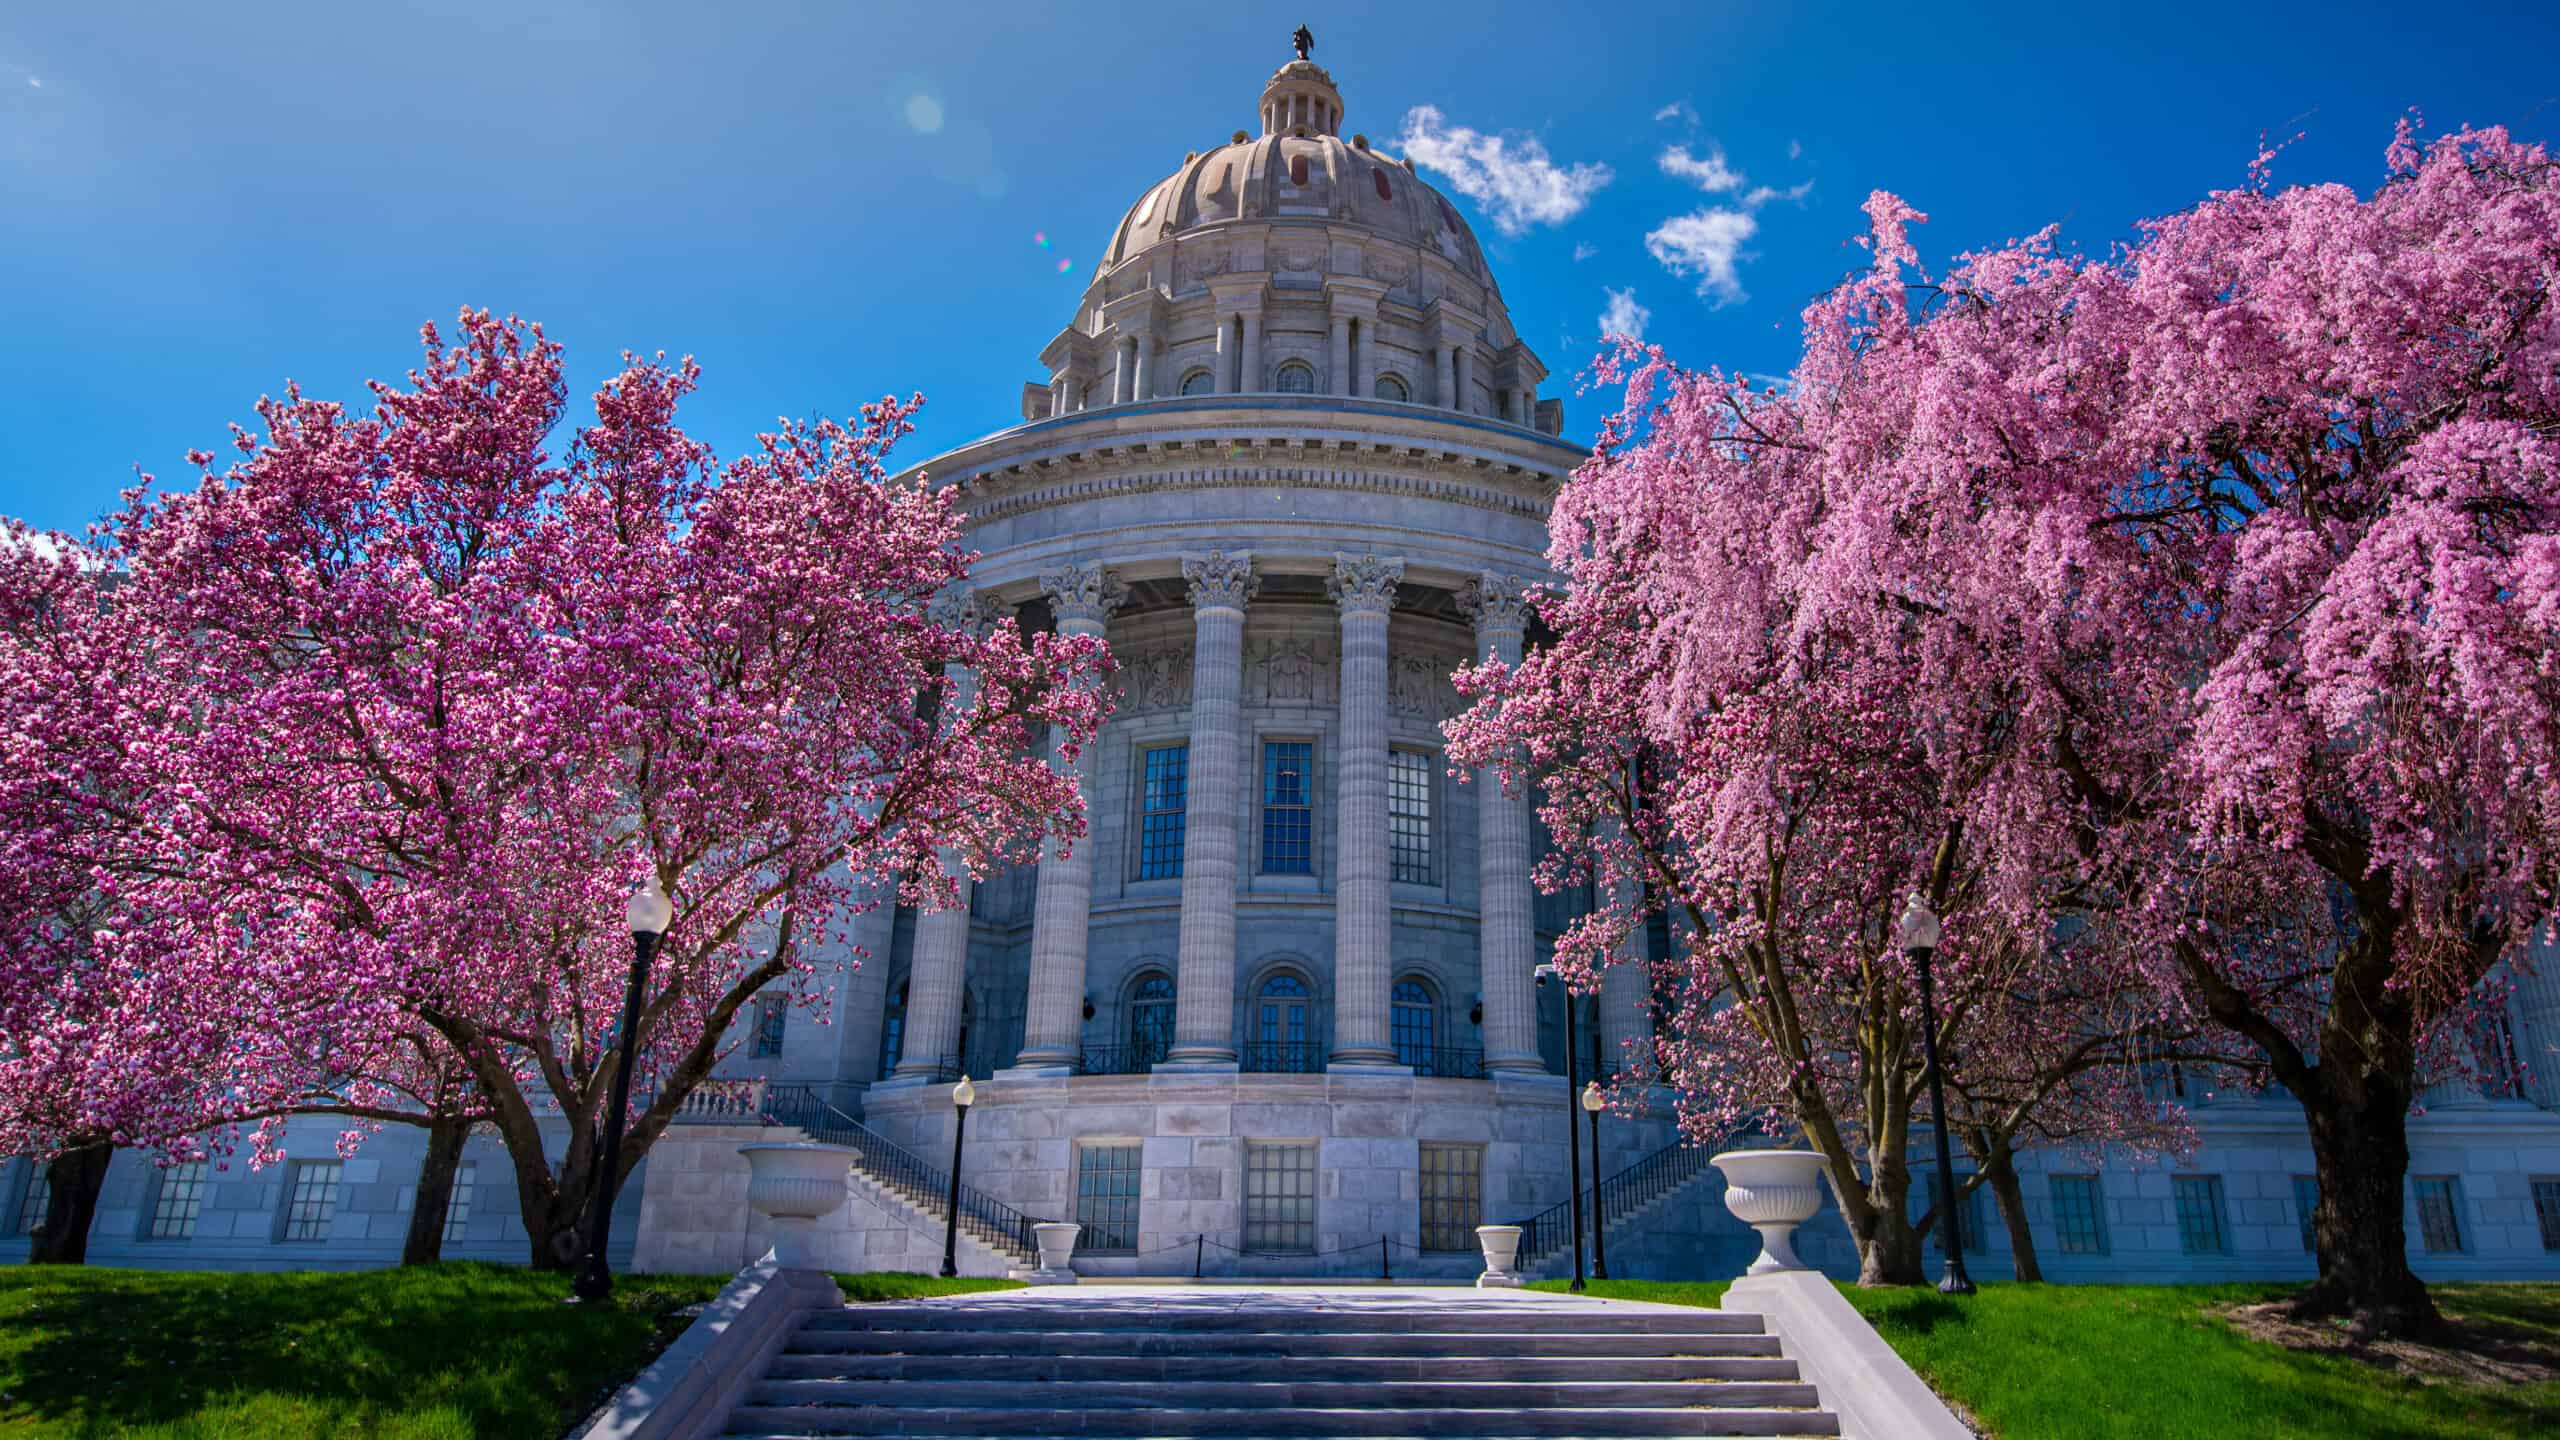 Pink magnolia and red bud flowers blooming beside stairs leading to north side of domed Missouri state capitol building in Jefferson City with blue sky. This is where Missouri's kratom regulation debate takes place.